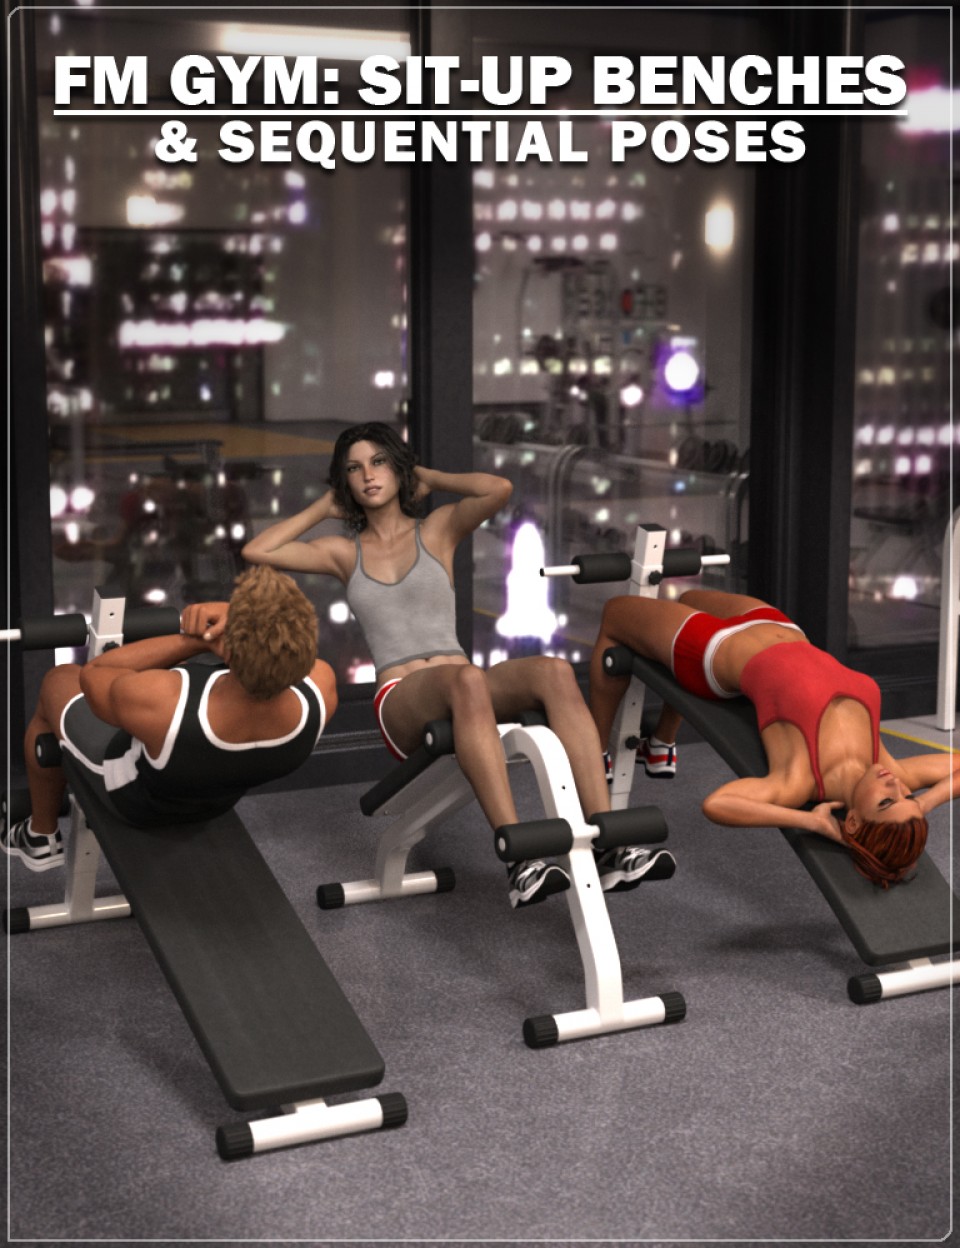 FM Gym: Sit-Up Benches & Poses